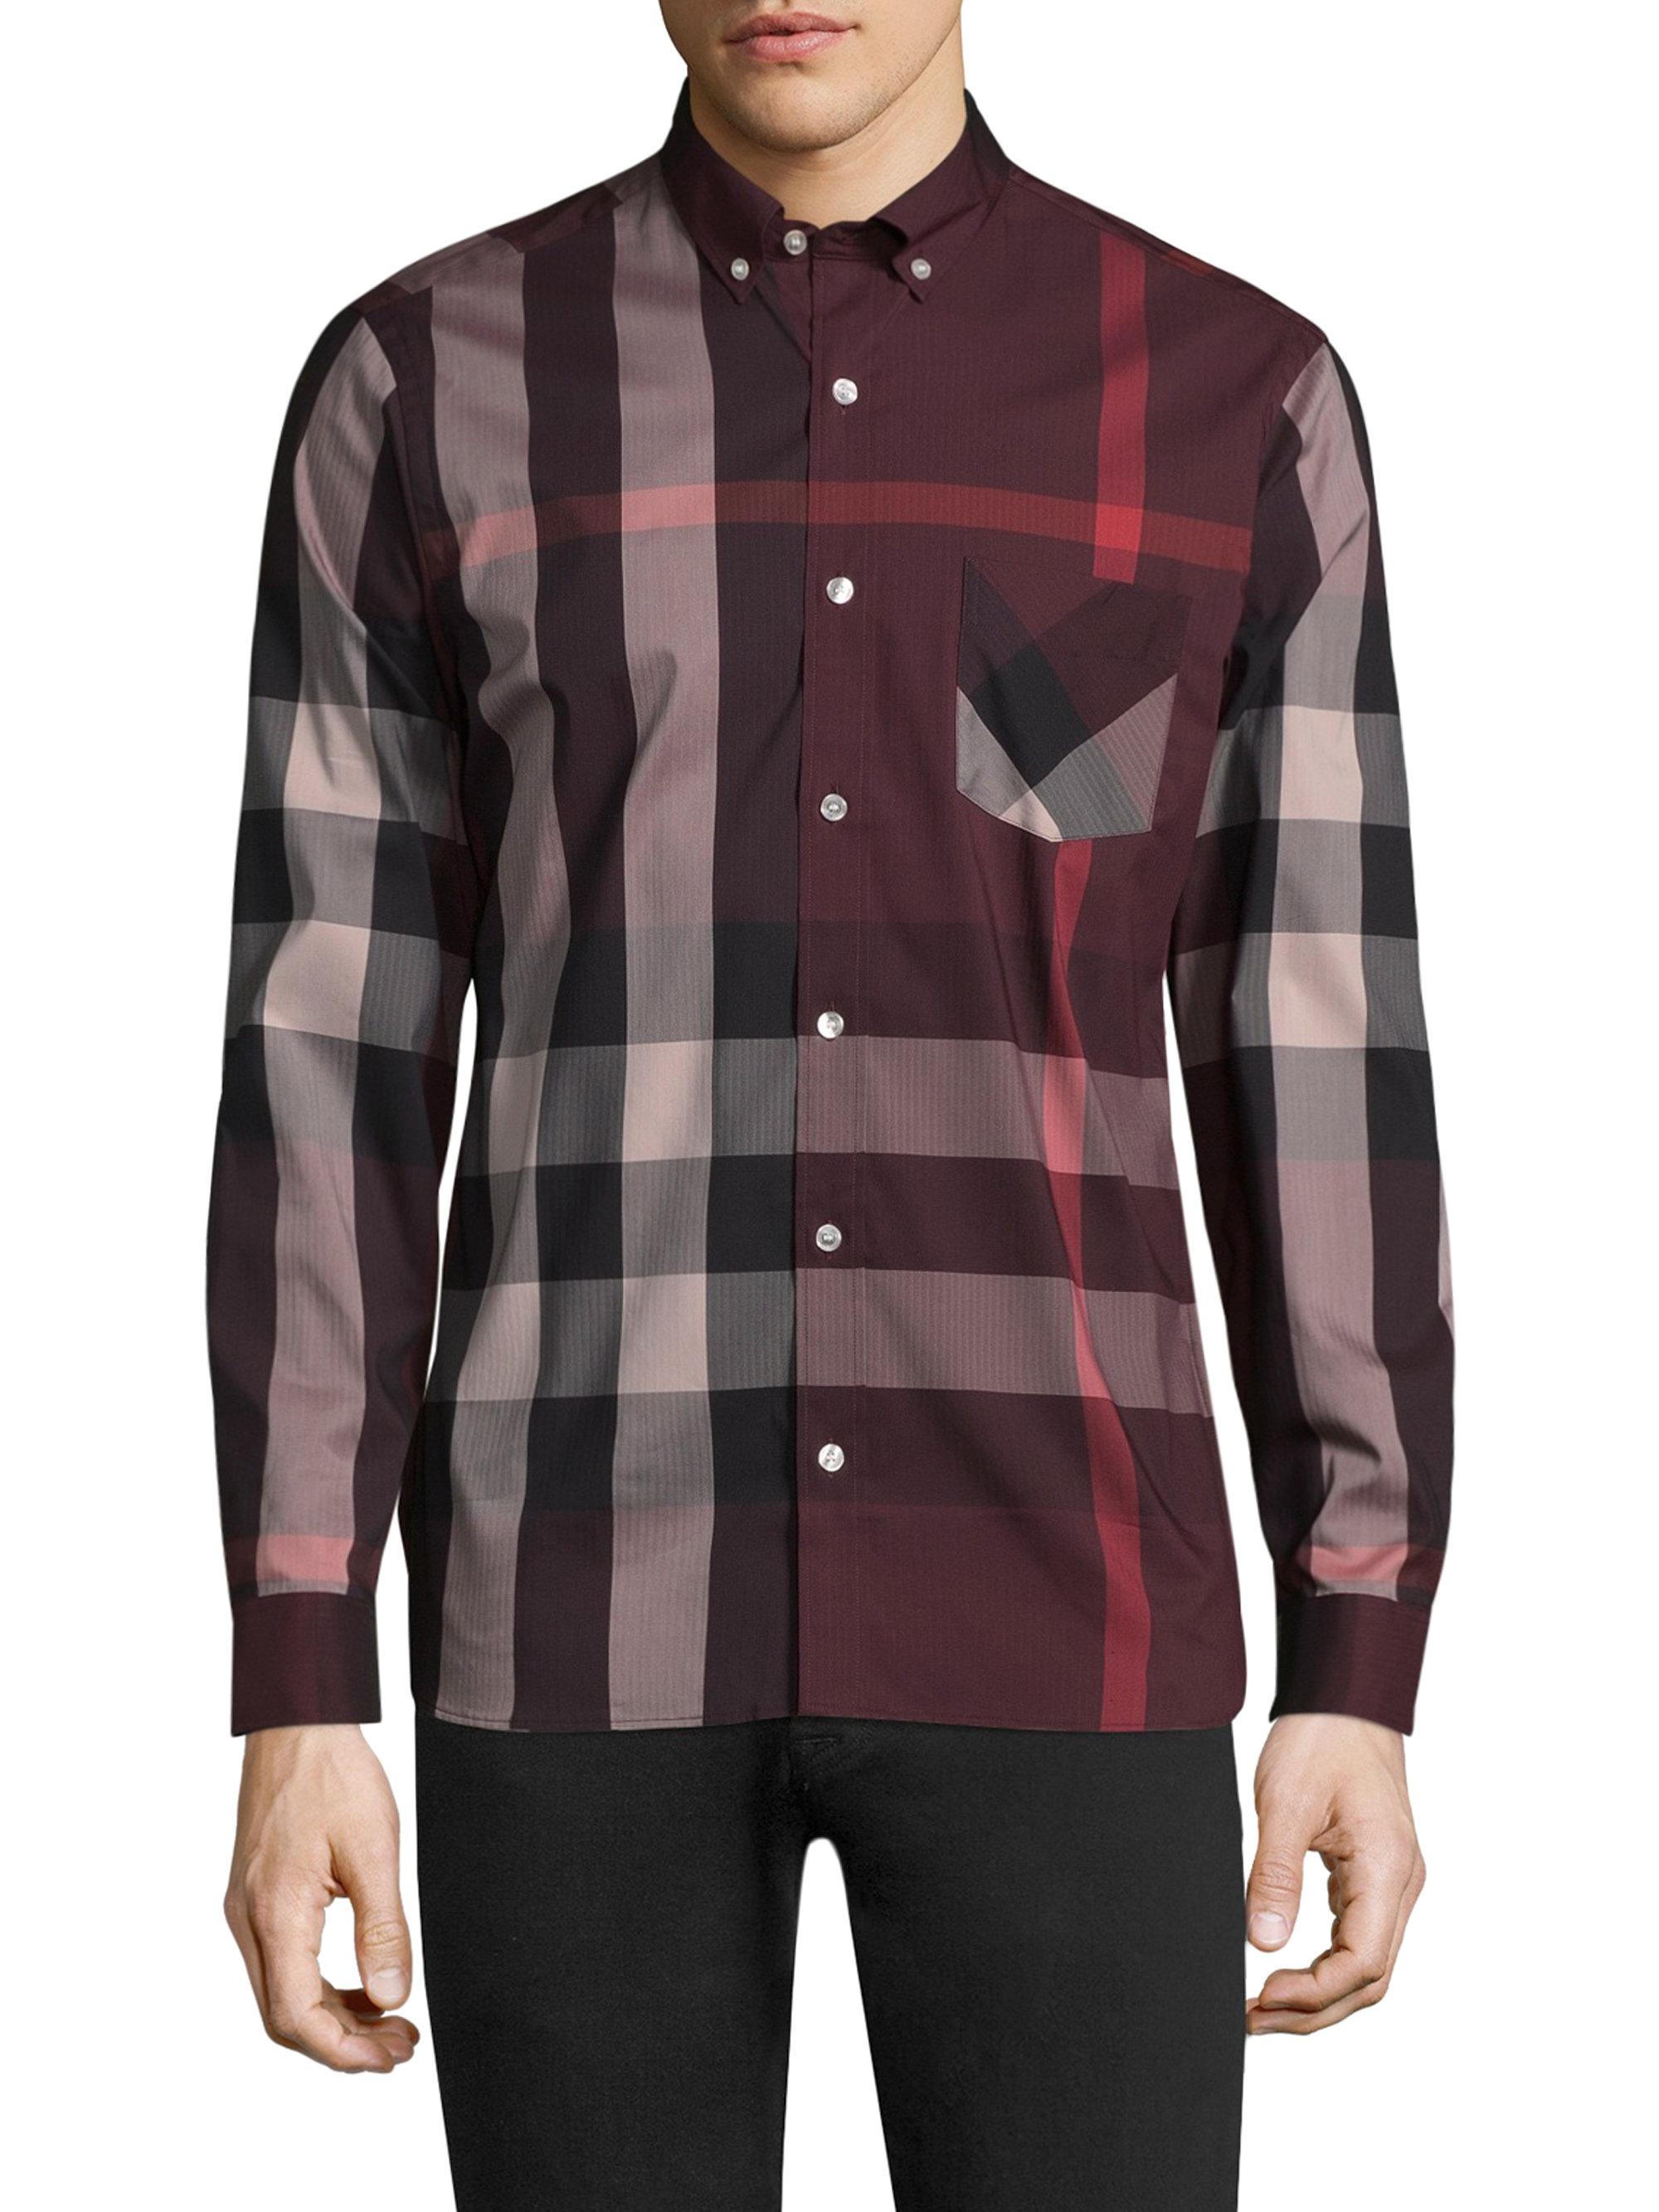 Lyst - Burberry Thornaby Plaid Casual Button-down Shirt in Red for Men